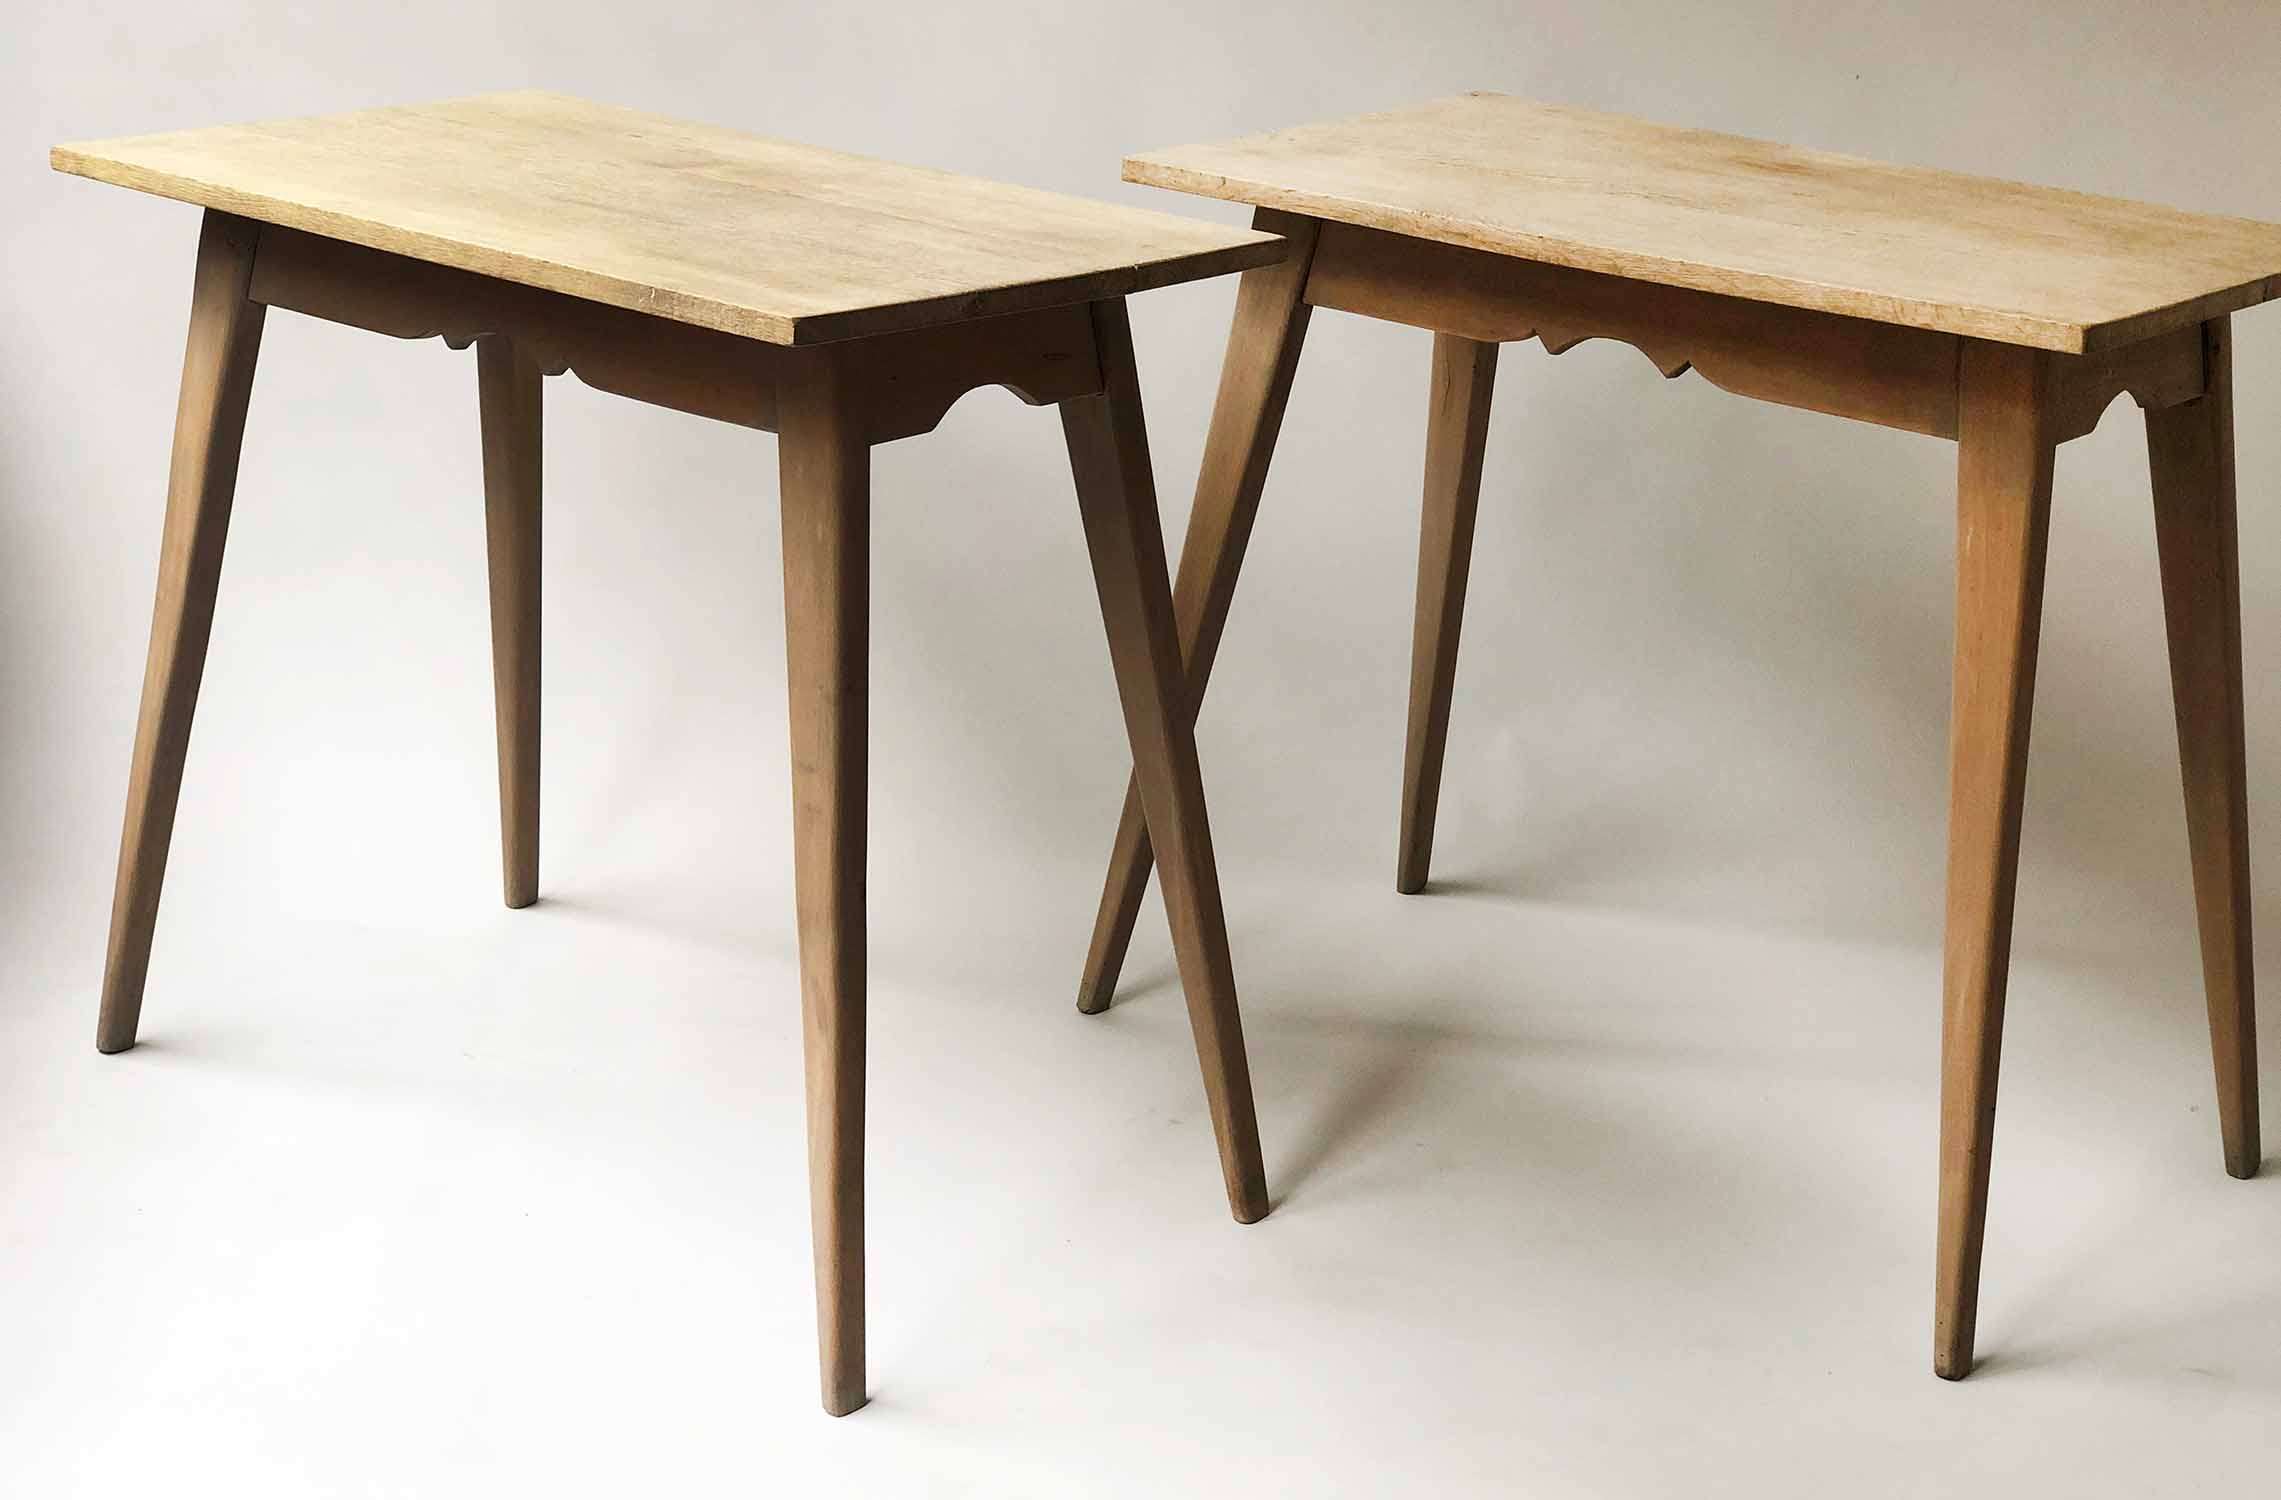 SIDE TABLES, a pair, 'OKA' style, limed oak and grey washed,